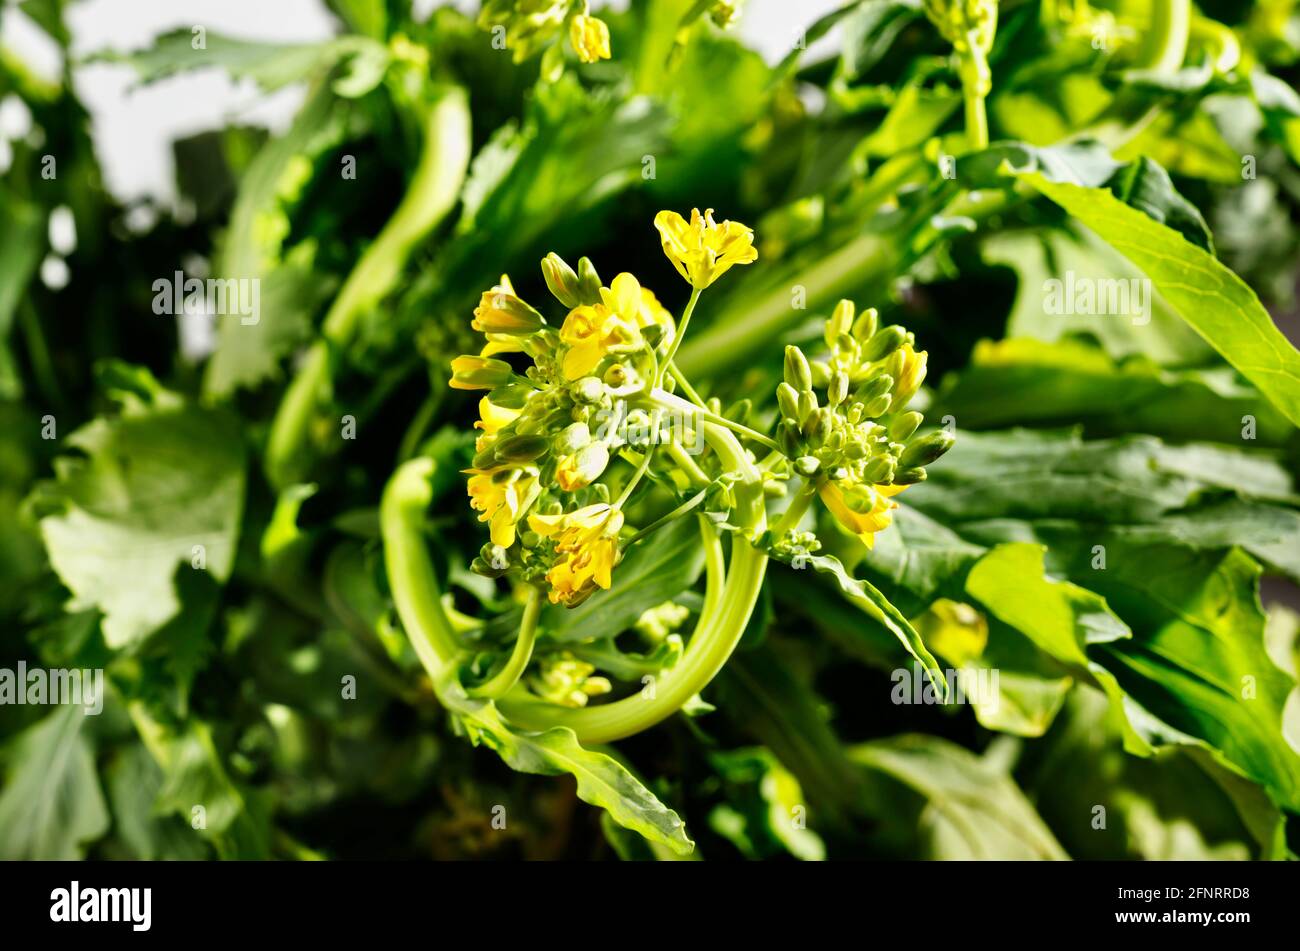 Bunch of turnip greens -brassica rapa - with yellow flowers , root vegetable with bitter taste Stock Photo